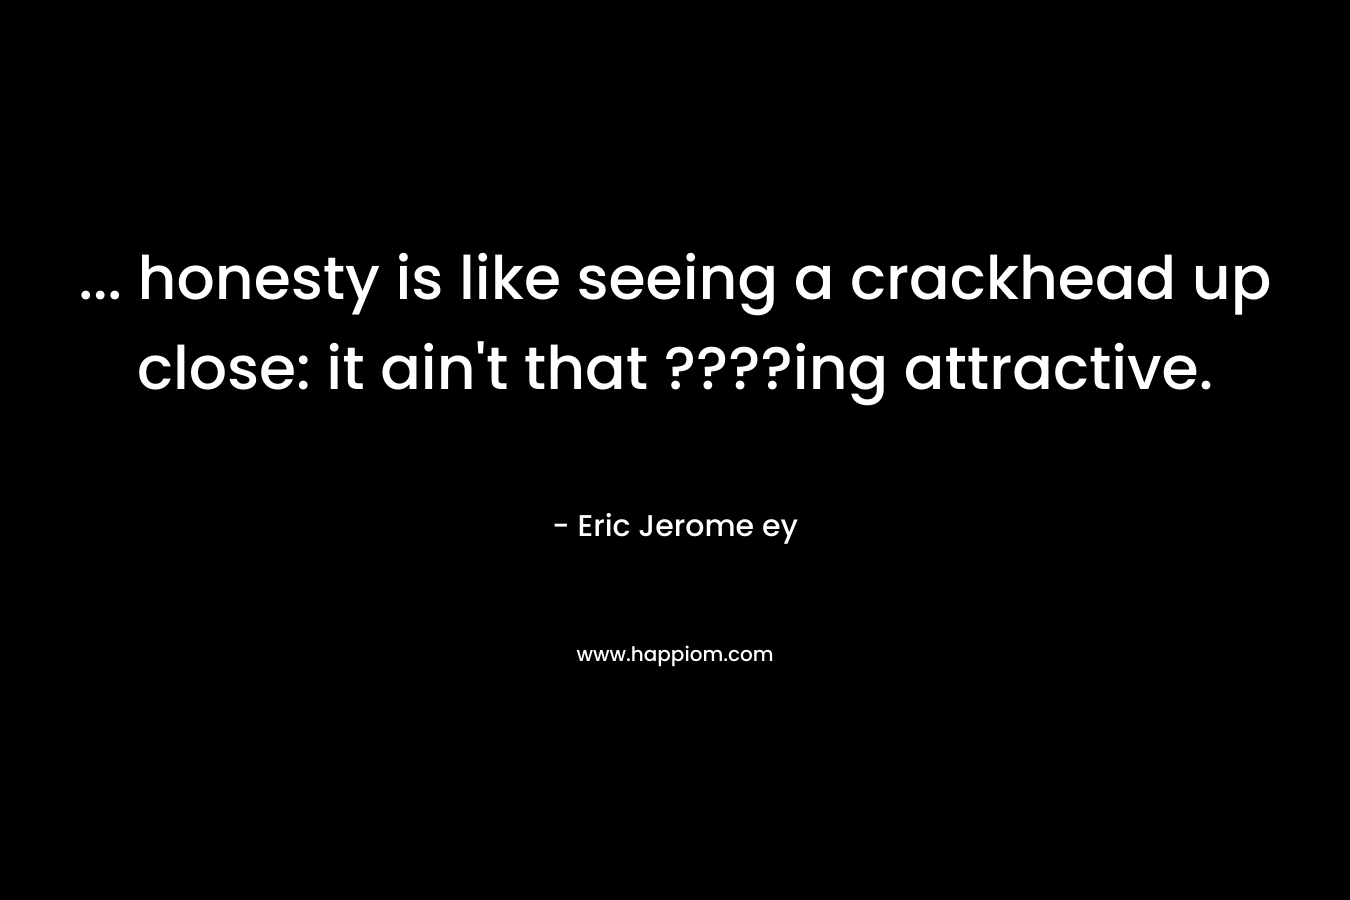 ... honesty is like seeing a crackhead up close: it ain't that ????ing attractive.